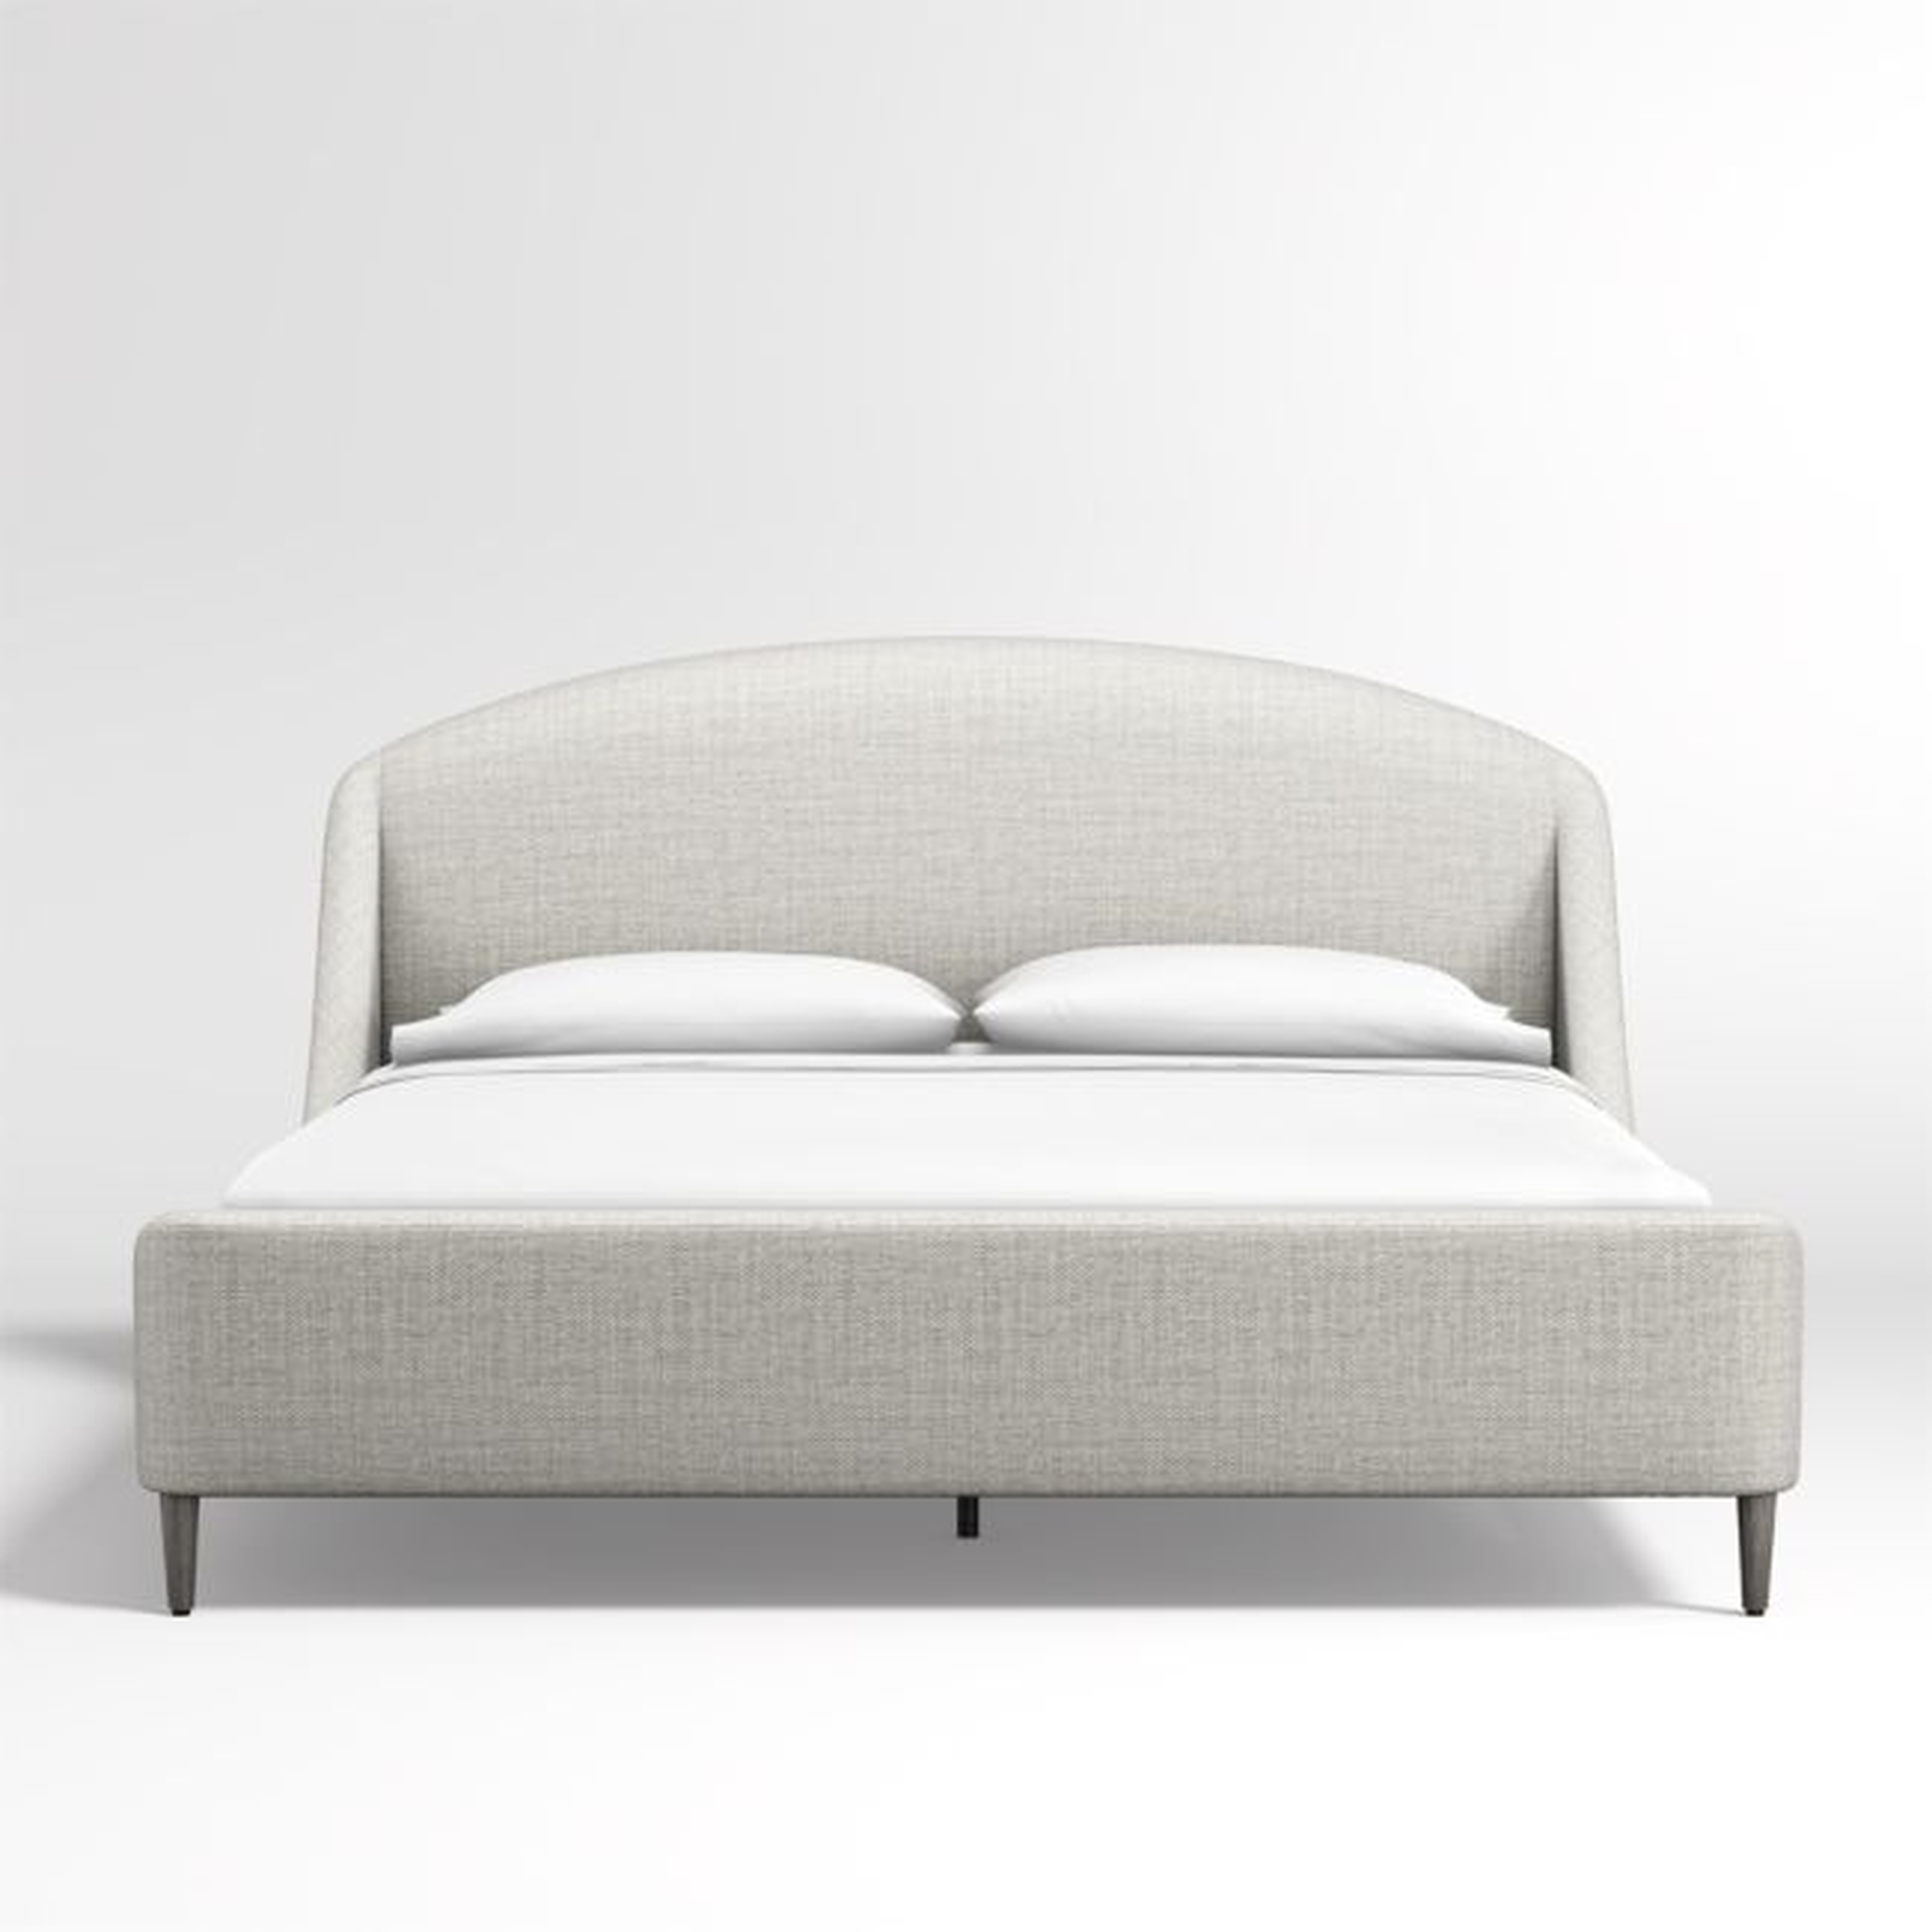 Lafayette Mist Upholstered King Bed - Crate and Barrel